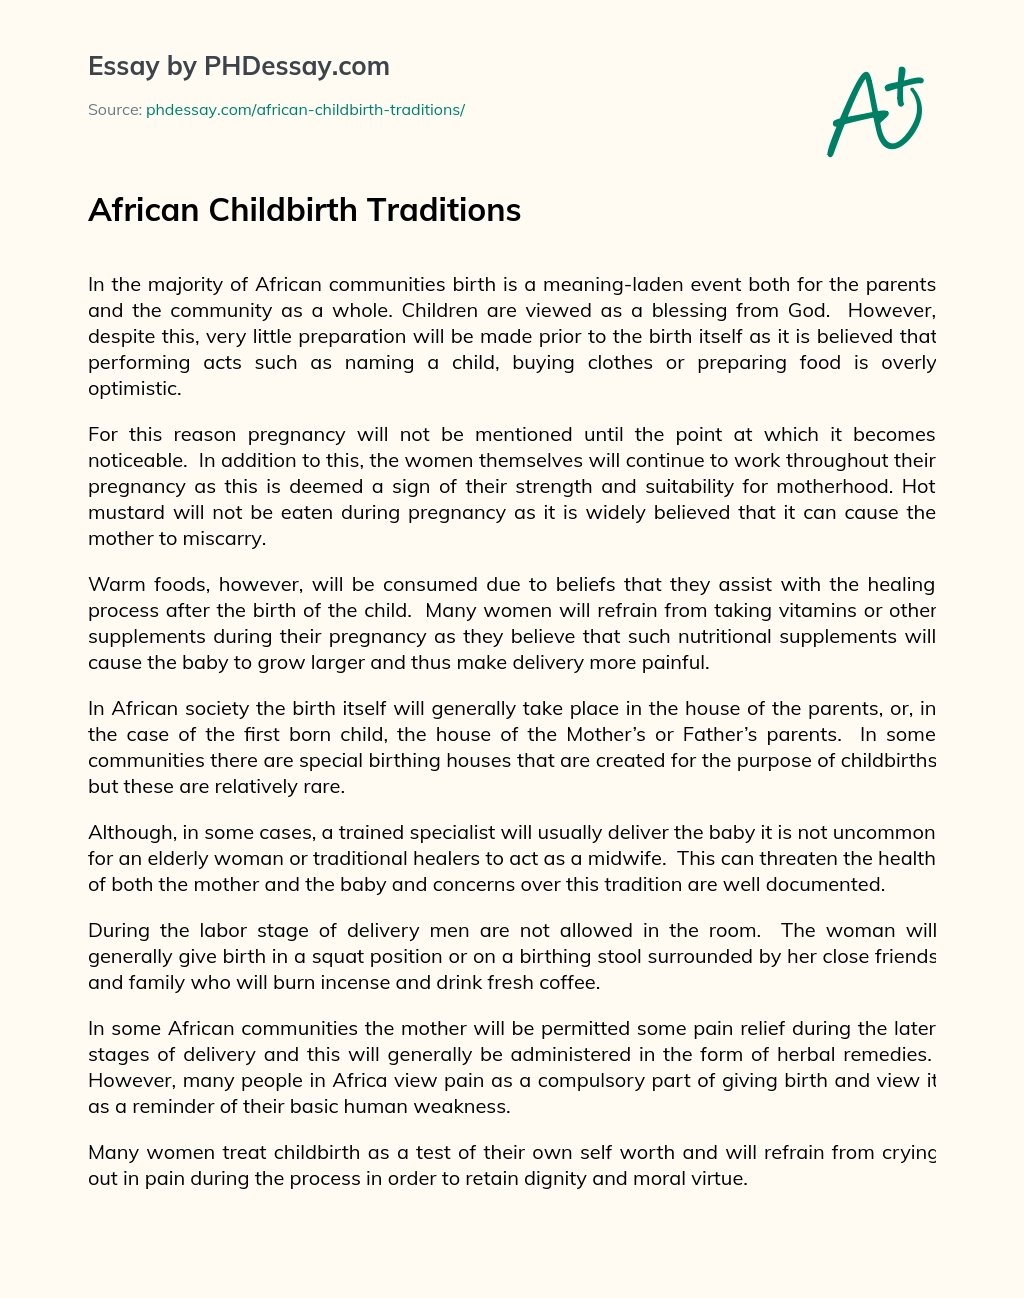 African Childbirth Traditions essay